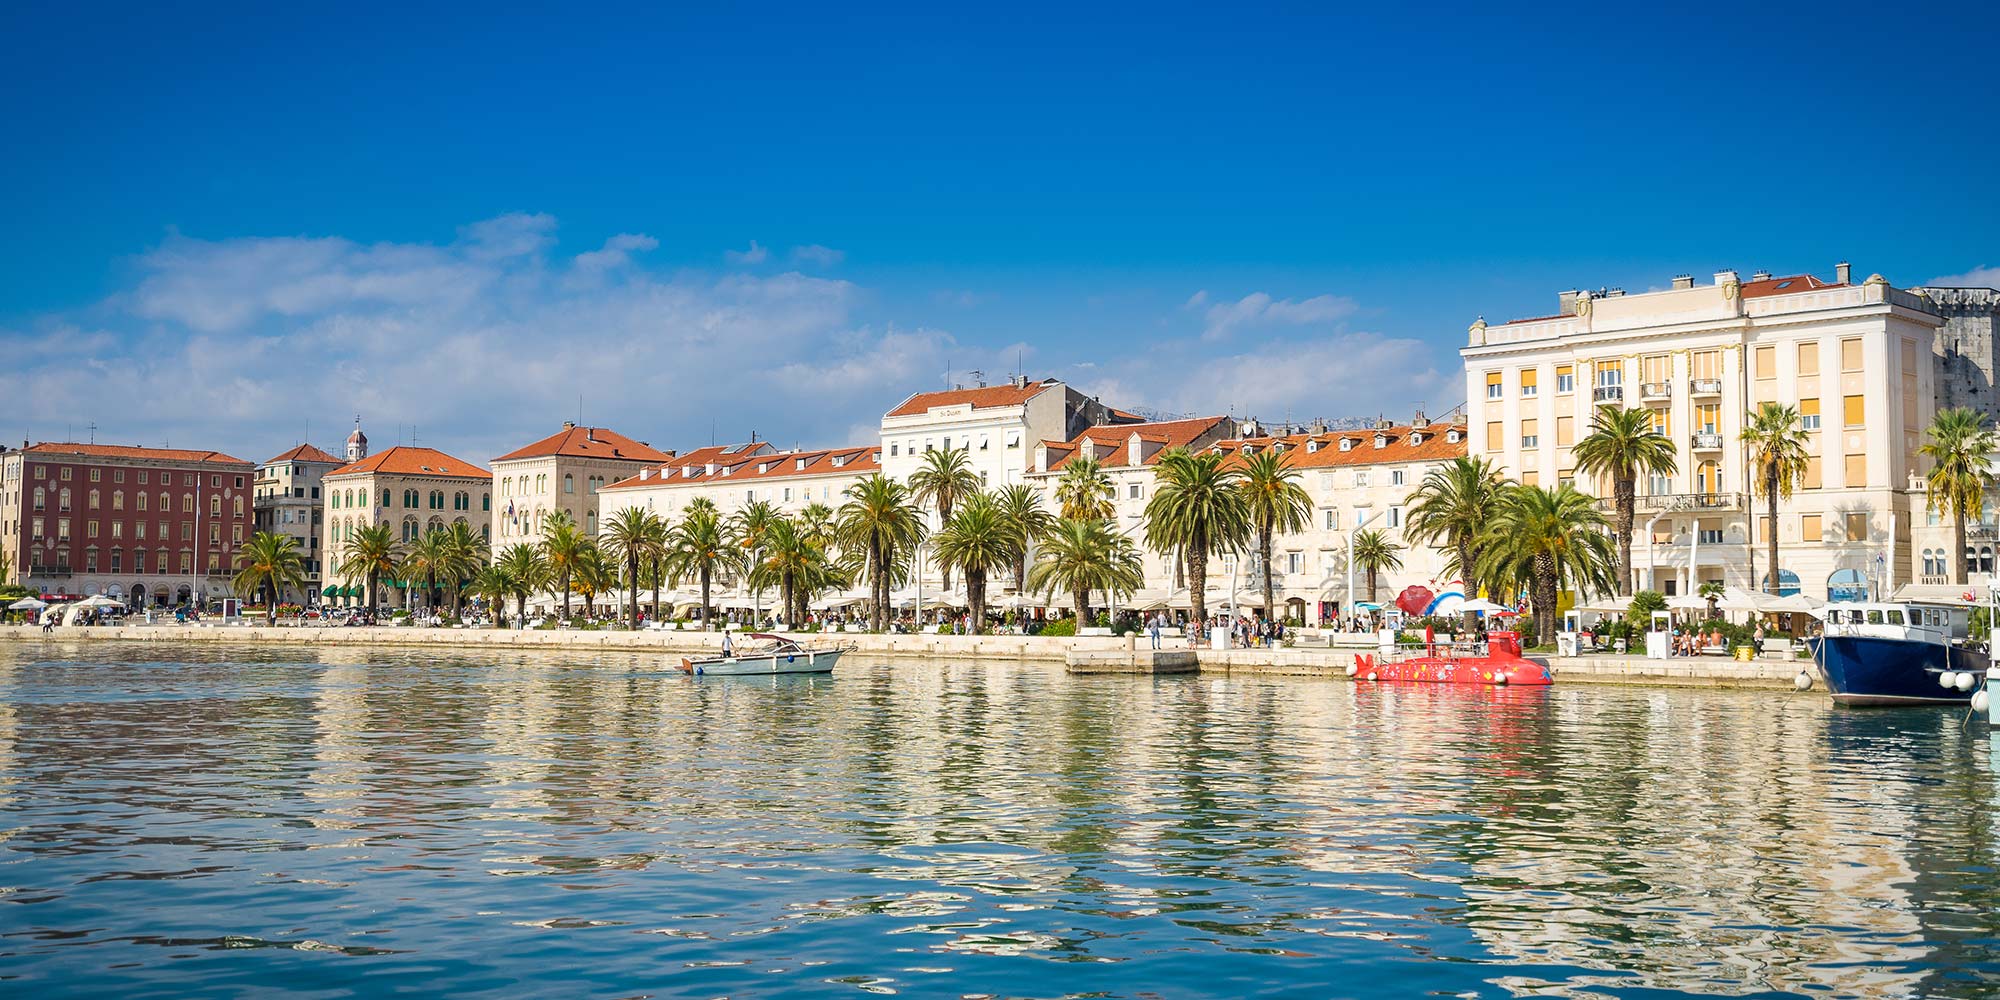 What to see in Split